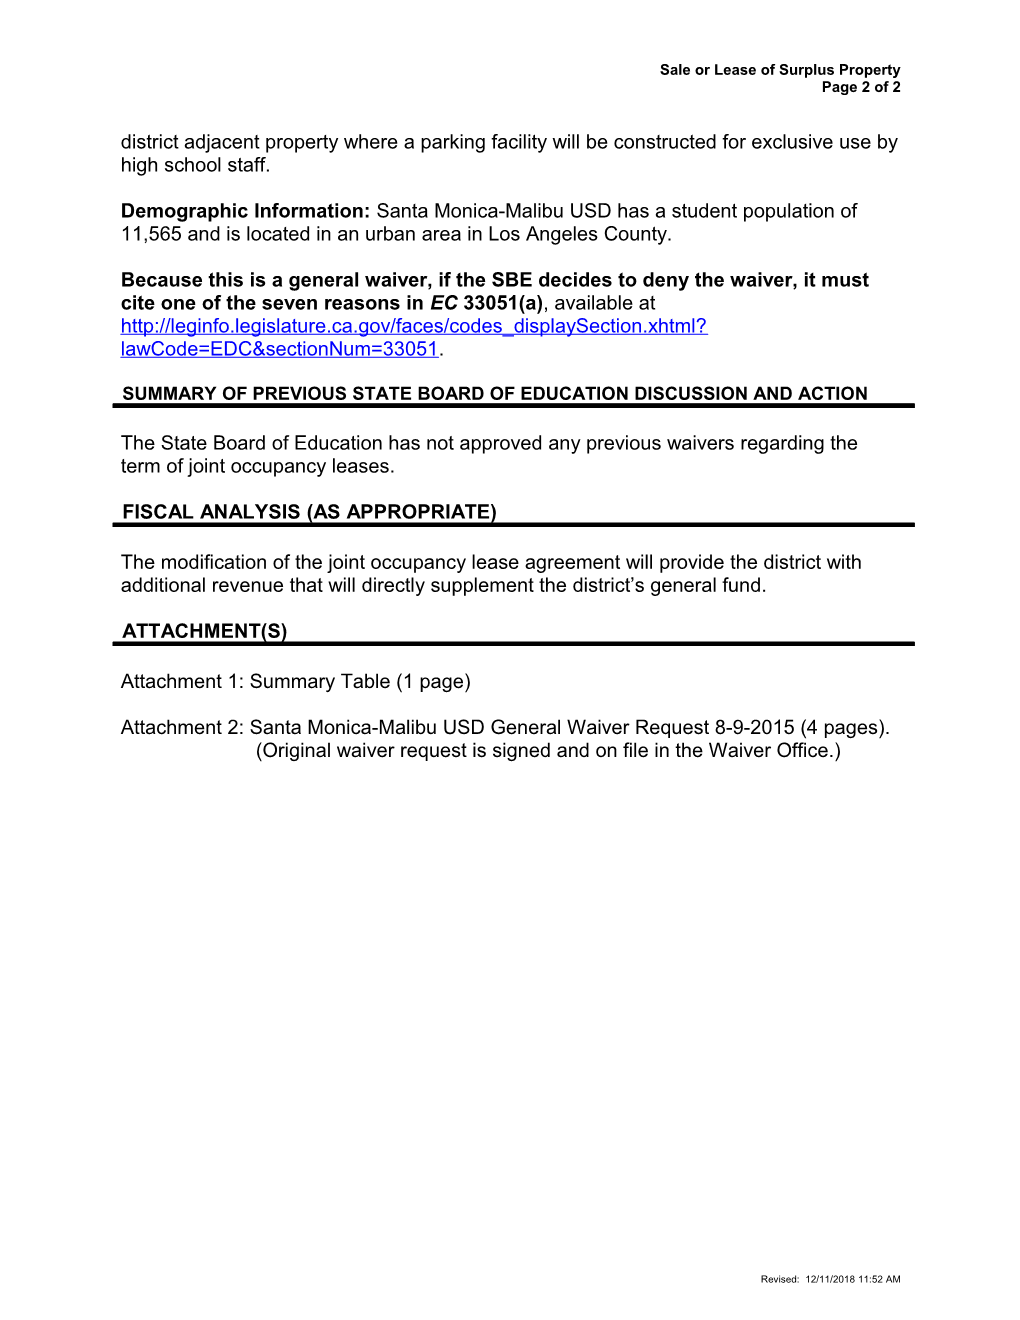 January 2016 Waiver Item W-03 - Meeting Agendas (CA State Board of Education)